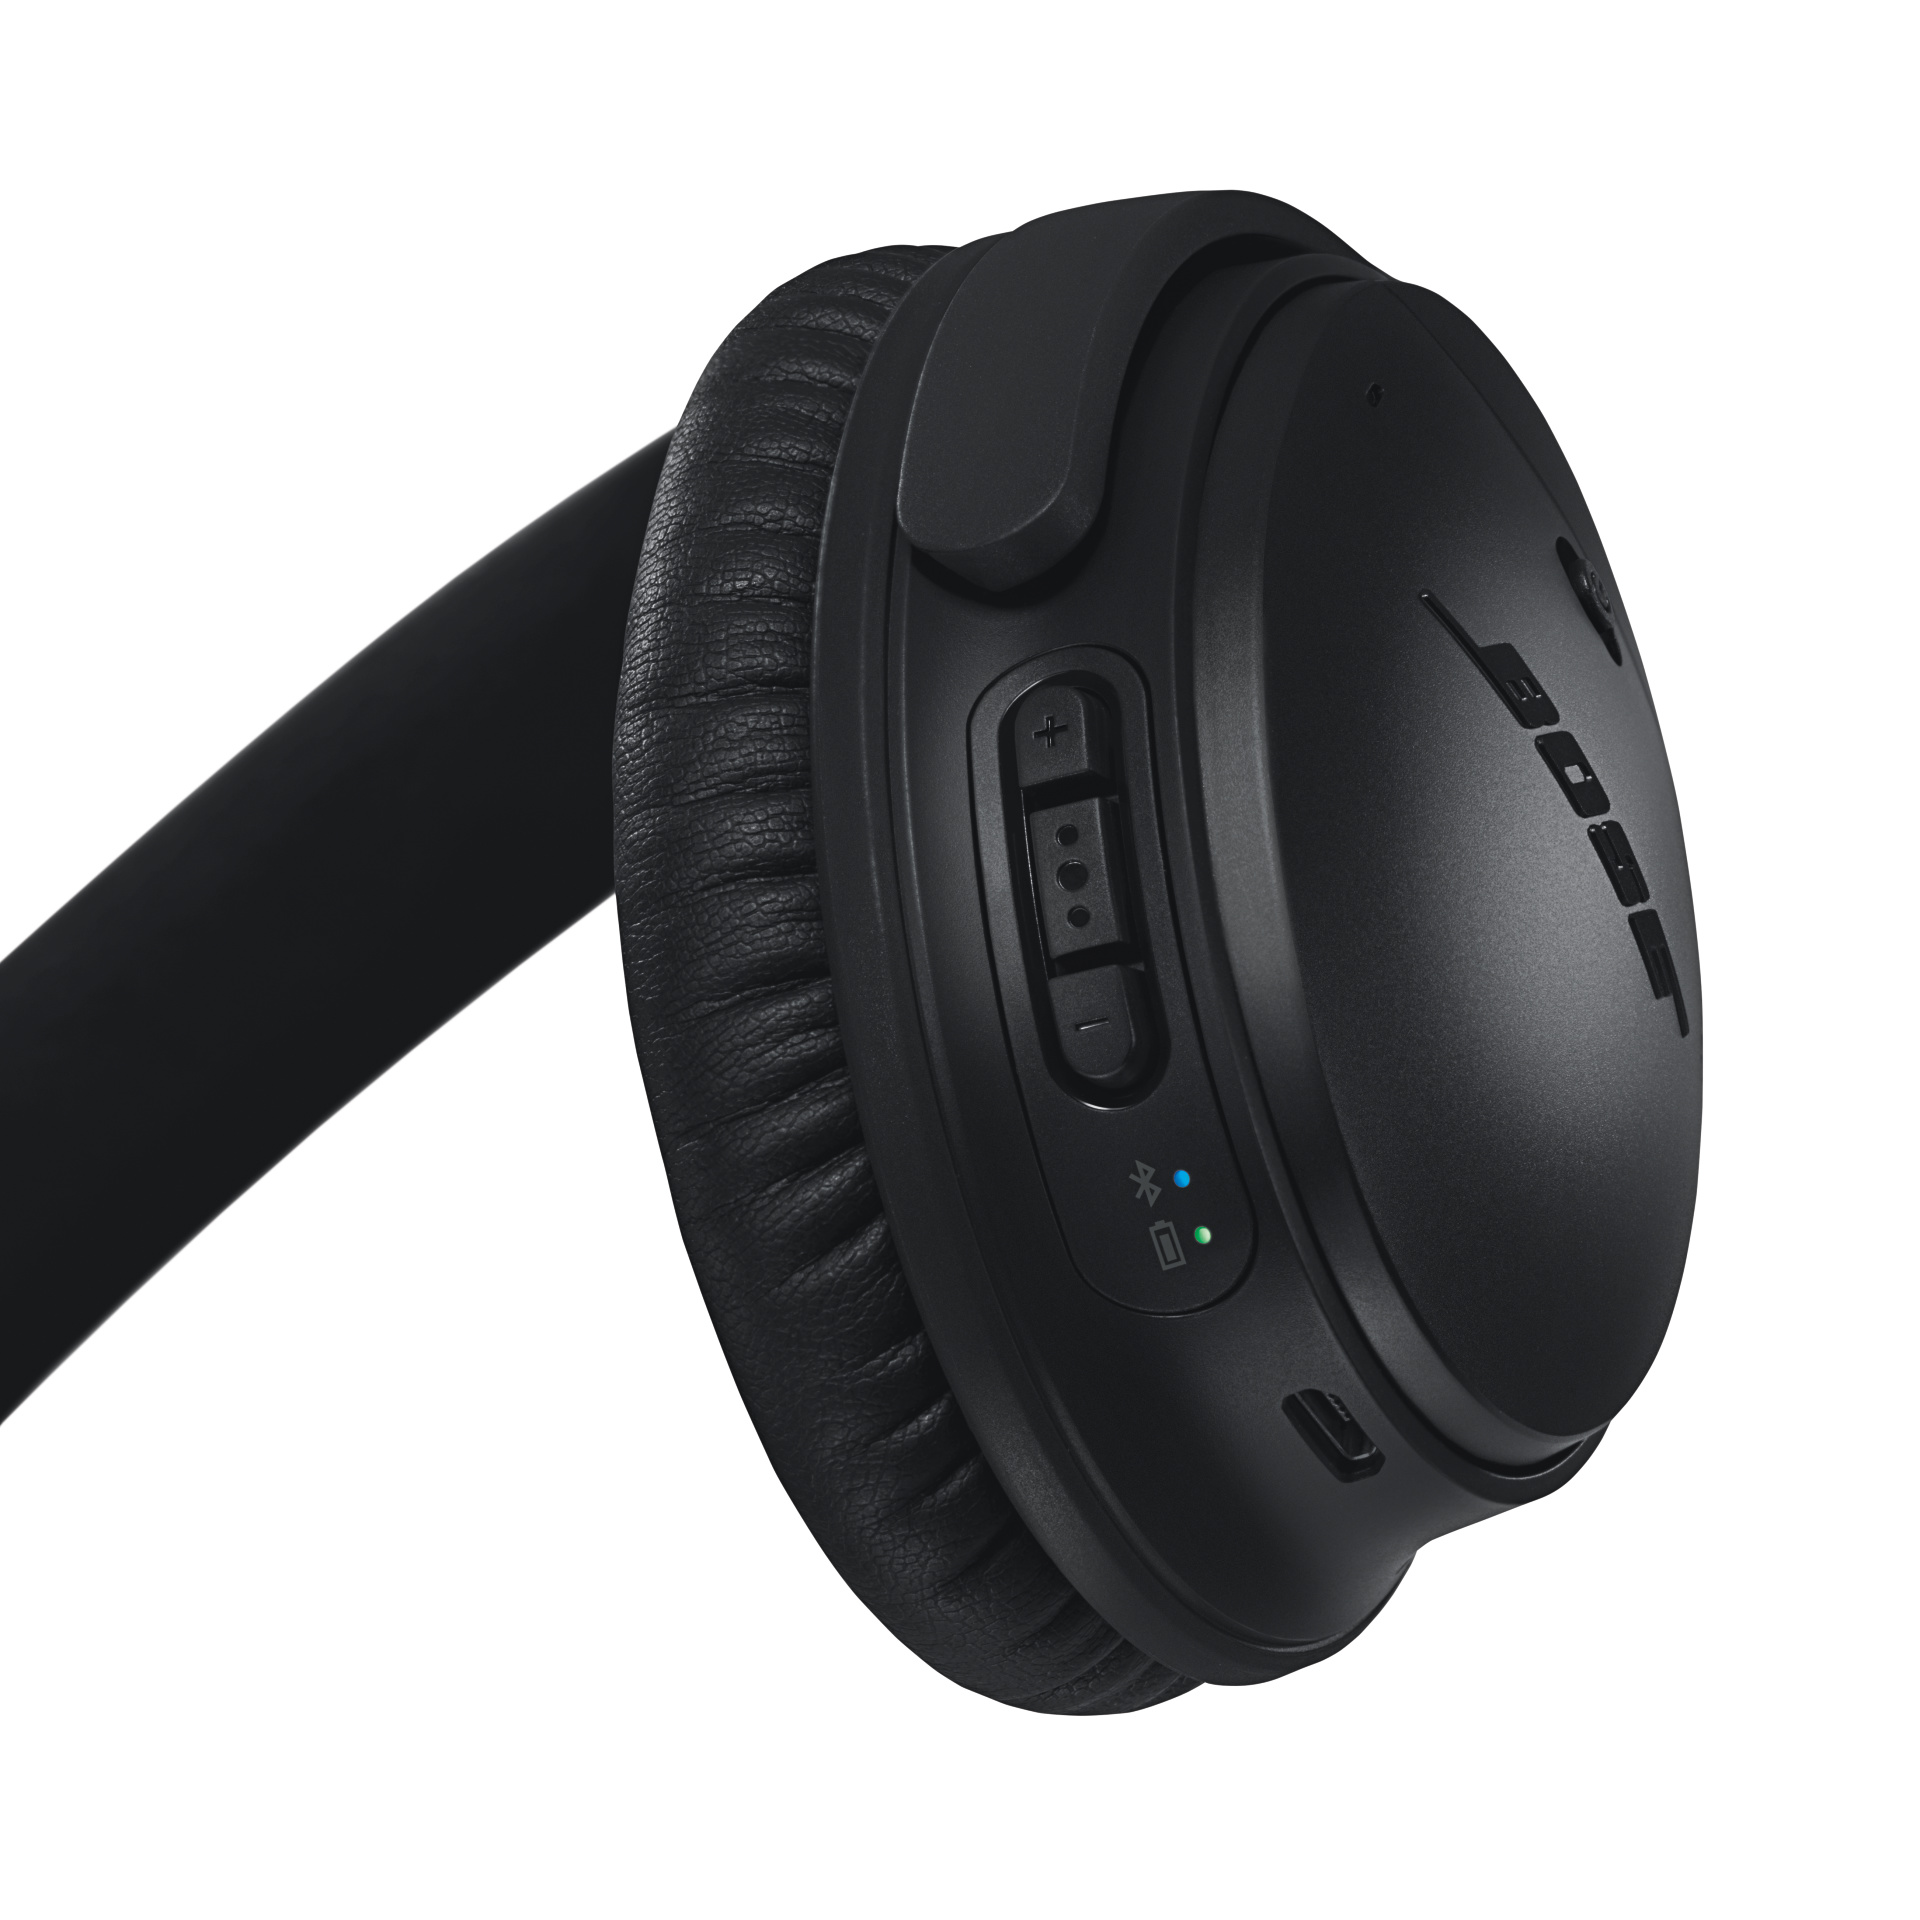 Bose QuietComfort 35 Noise Cancelling Bluetooth Over-Ear Wireless Headphones, Black - image 6 of 8